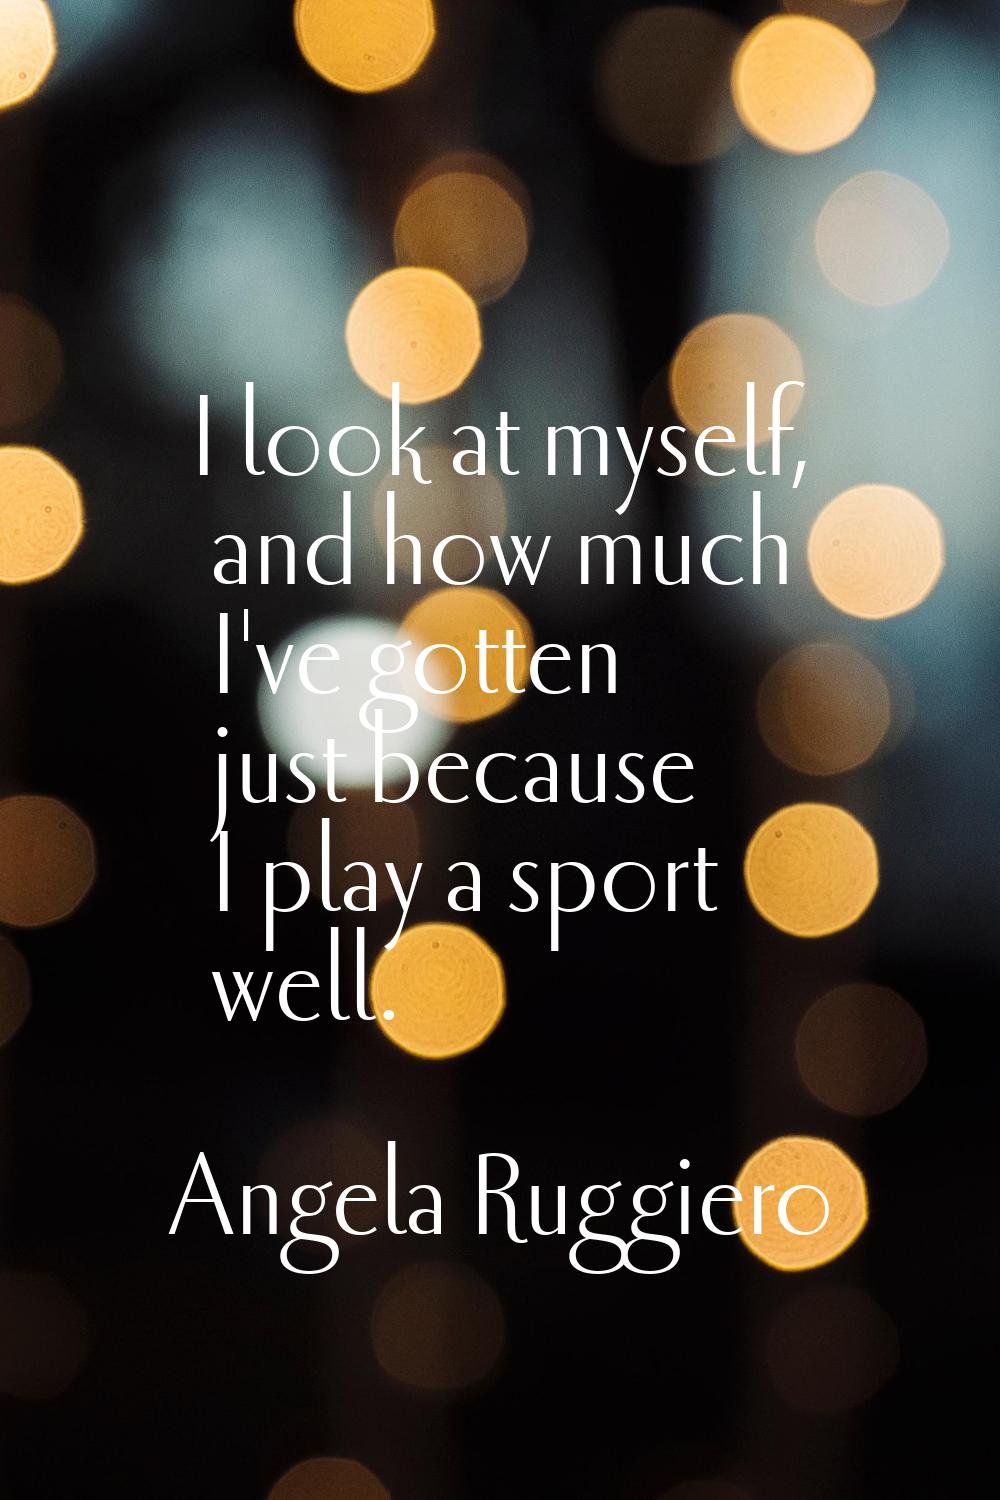 I look at myself, and how much I've gotten just because I play a sport well.